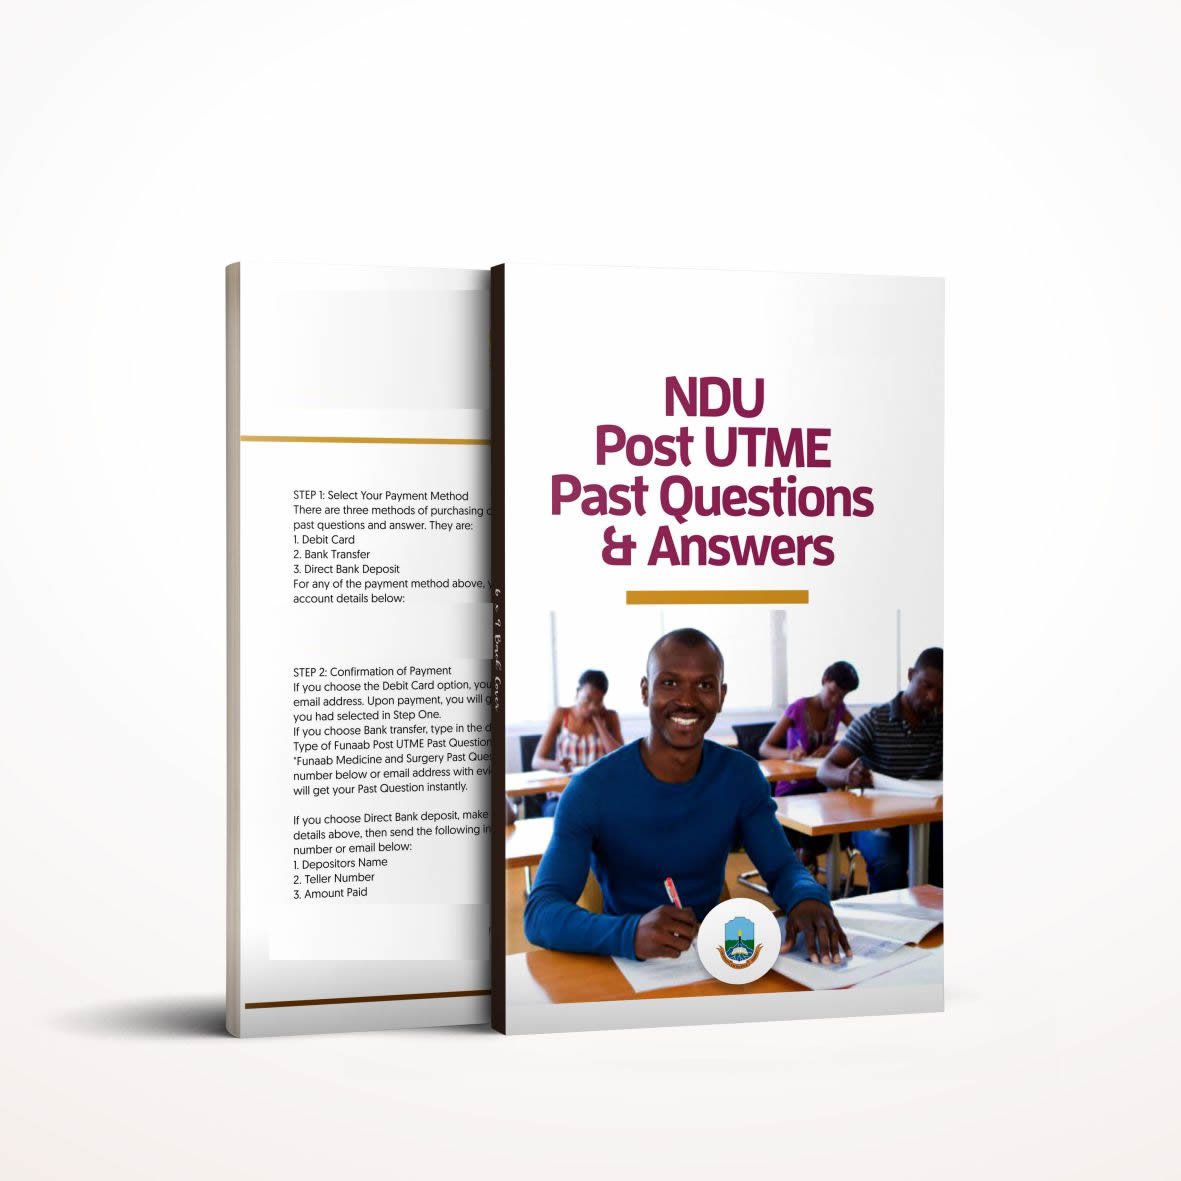 NDU Post UTME past questions and answers